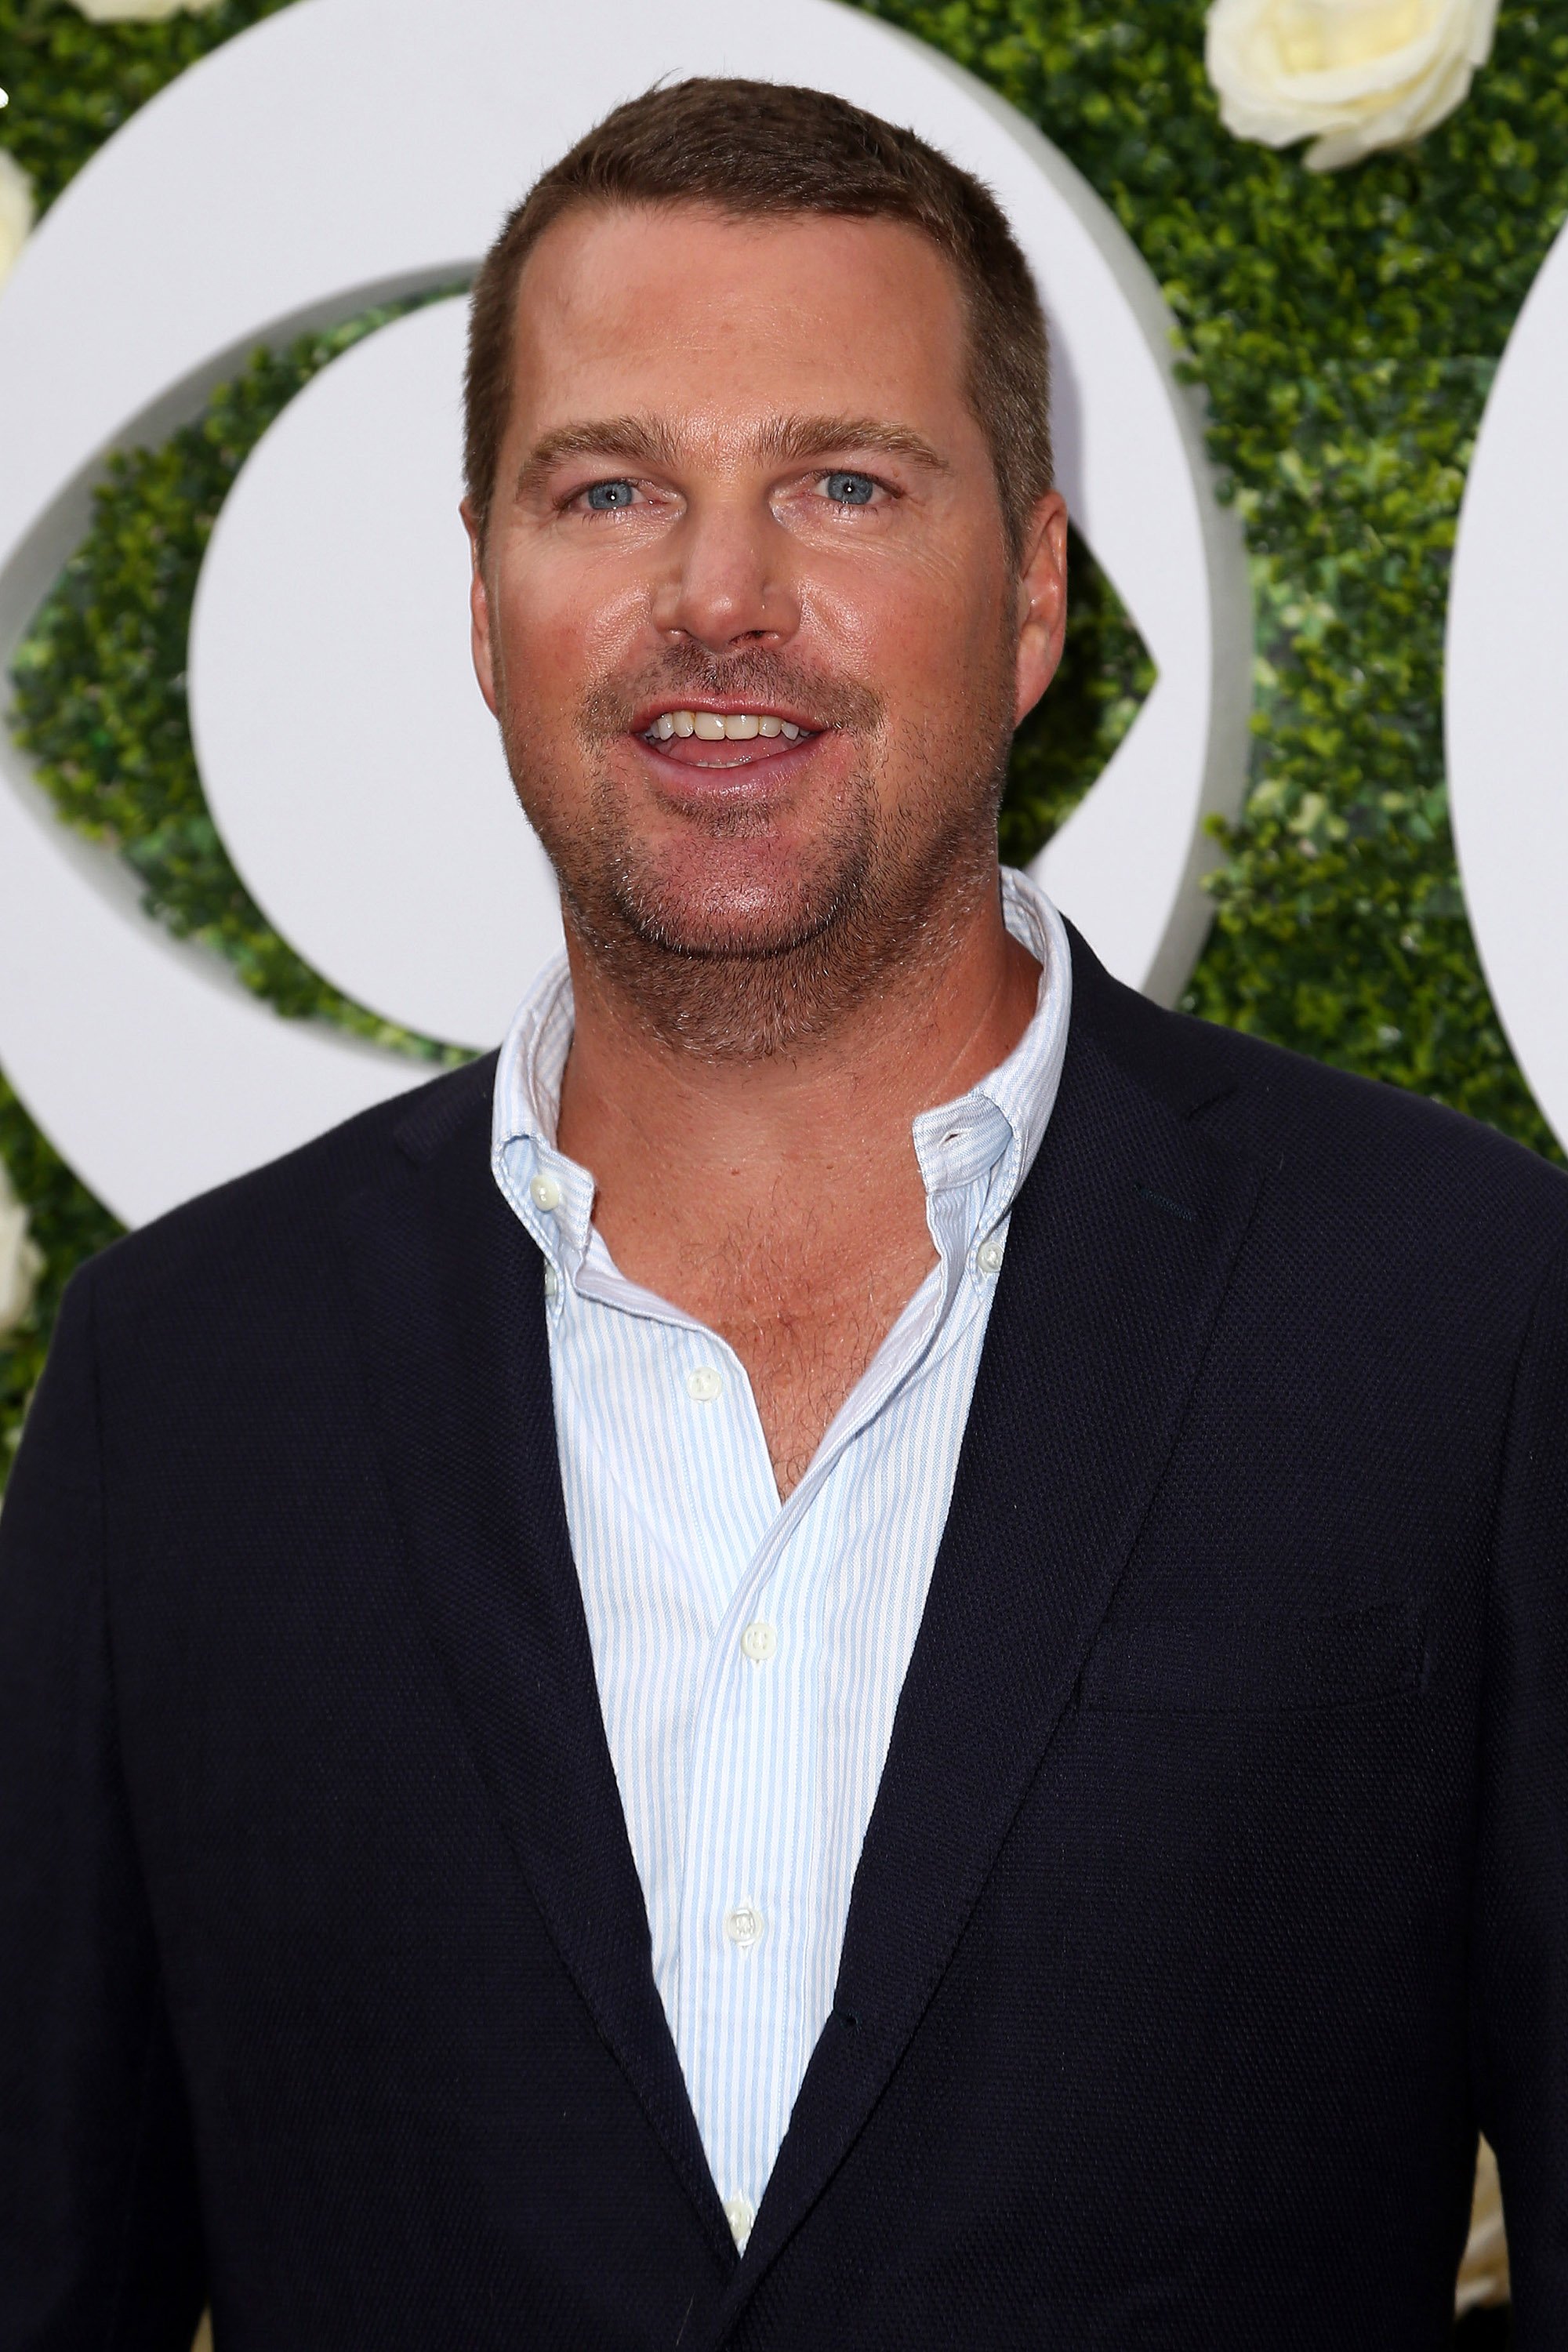 Chris O'Donnell at CBS Studios - Radford on August 1, 2017 | Source: Getty Images